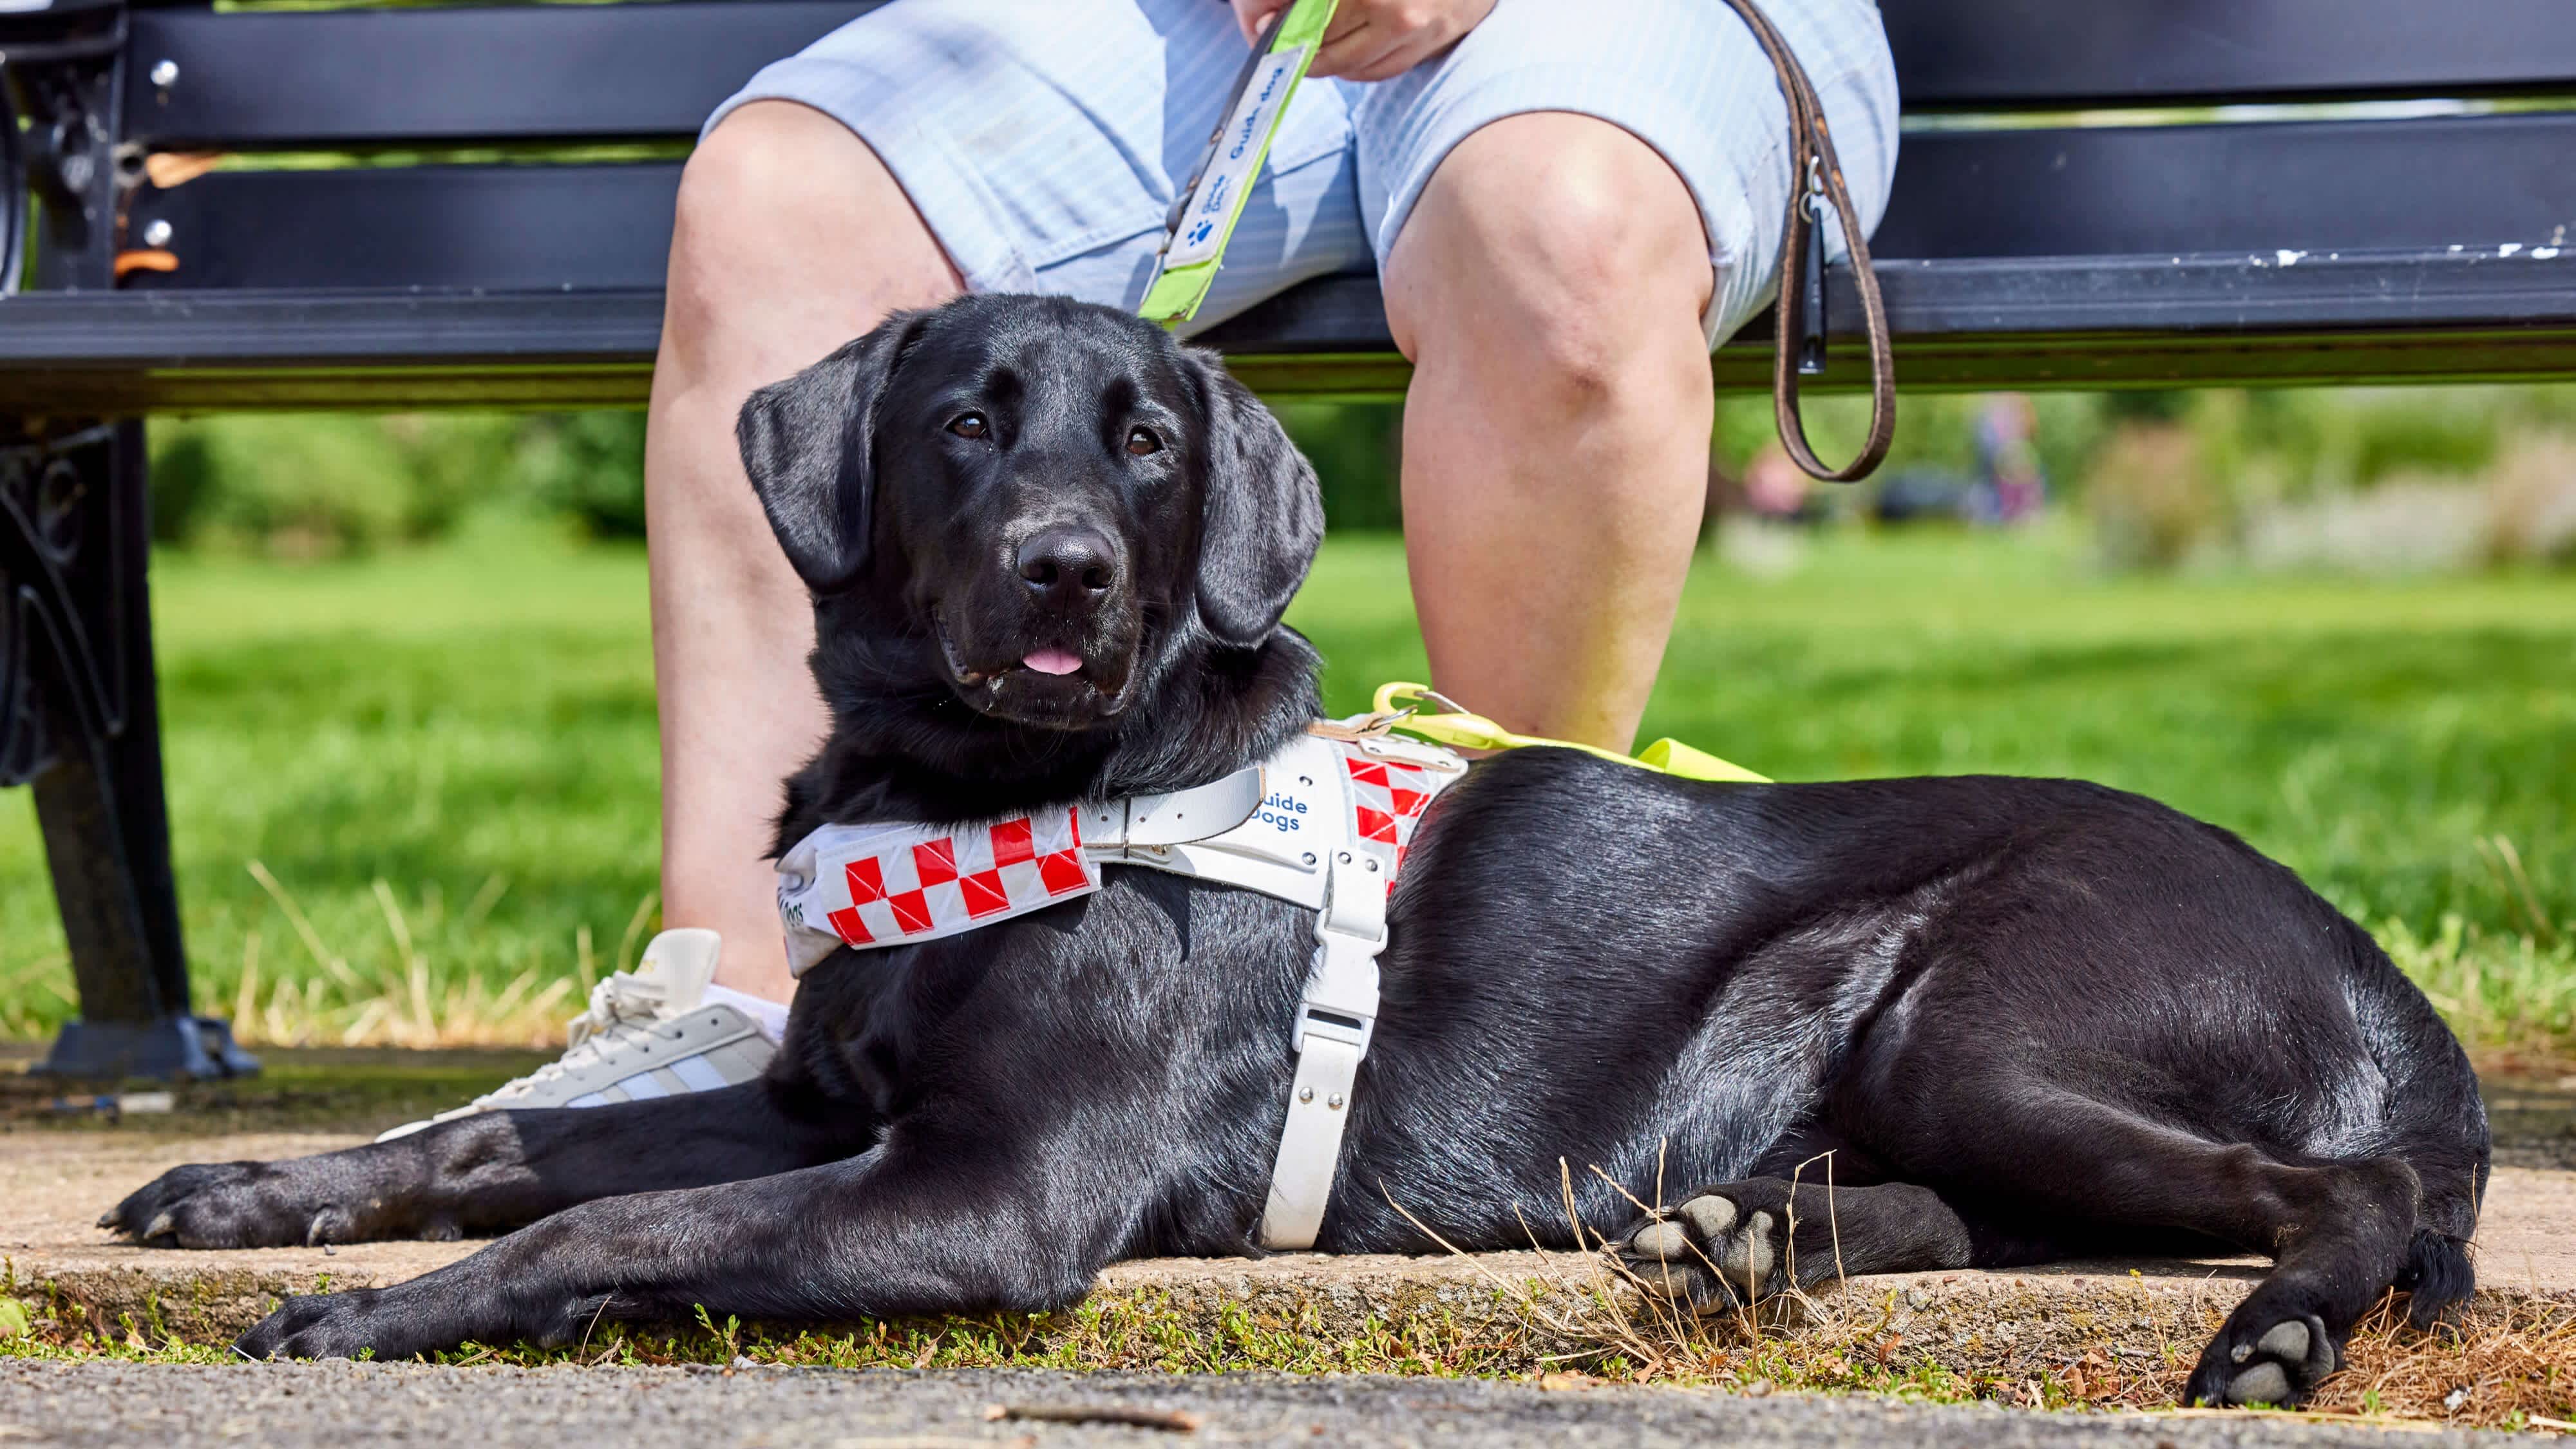 Black Labrador guide dog wearing a red and white check harness laying next to a bench. The legs of the dog's owner are in the background.